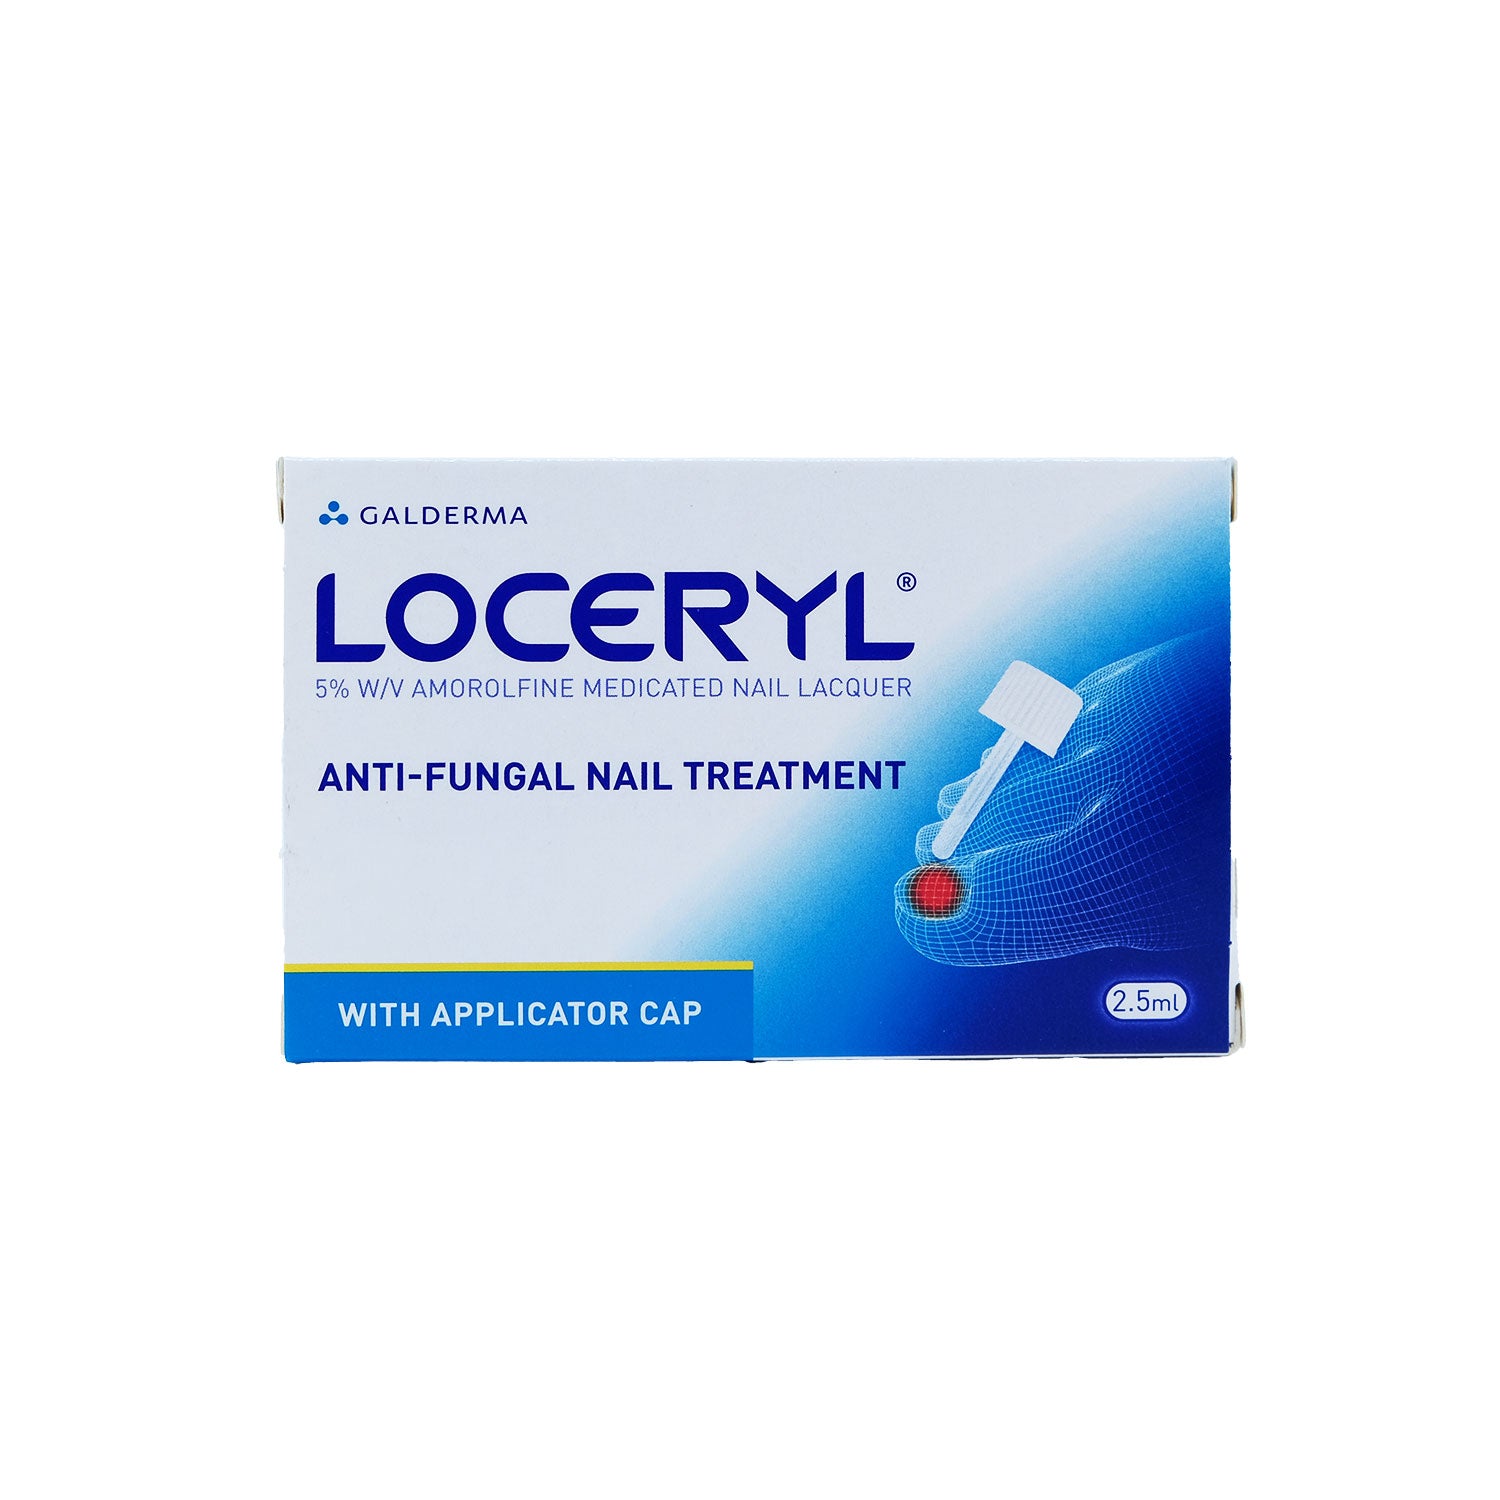 Buy Loceryl Nail Lacquer (2.5 ml) Online at Low Prices in India - Amazon.in